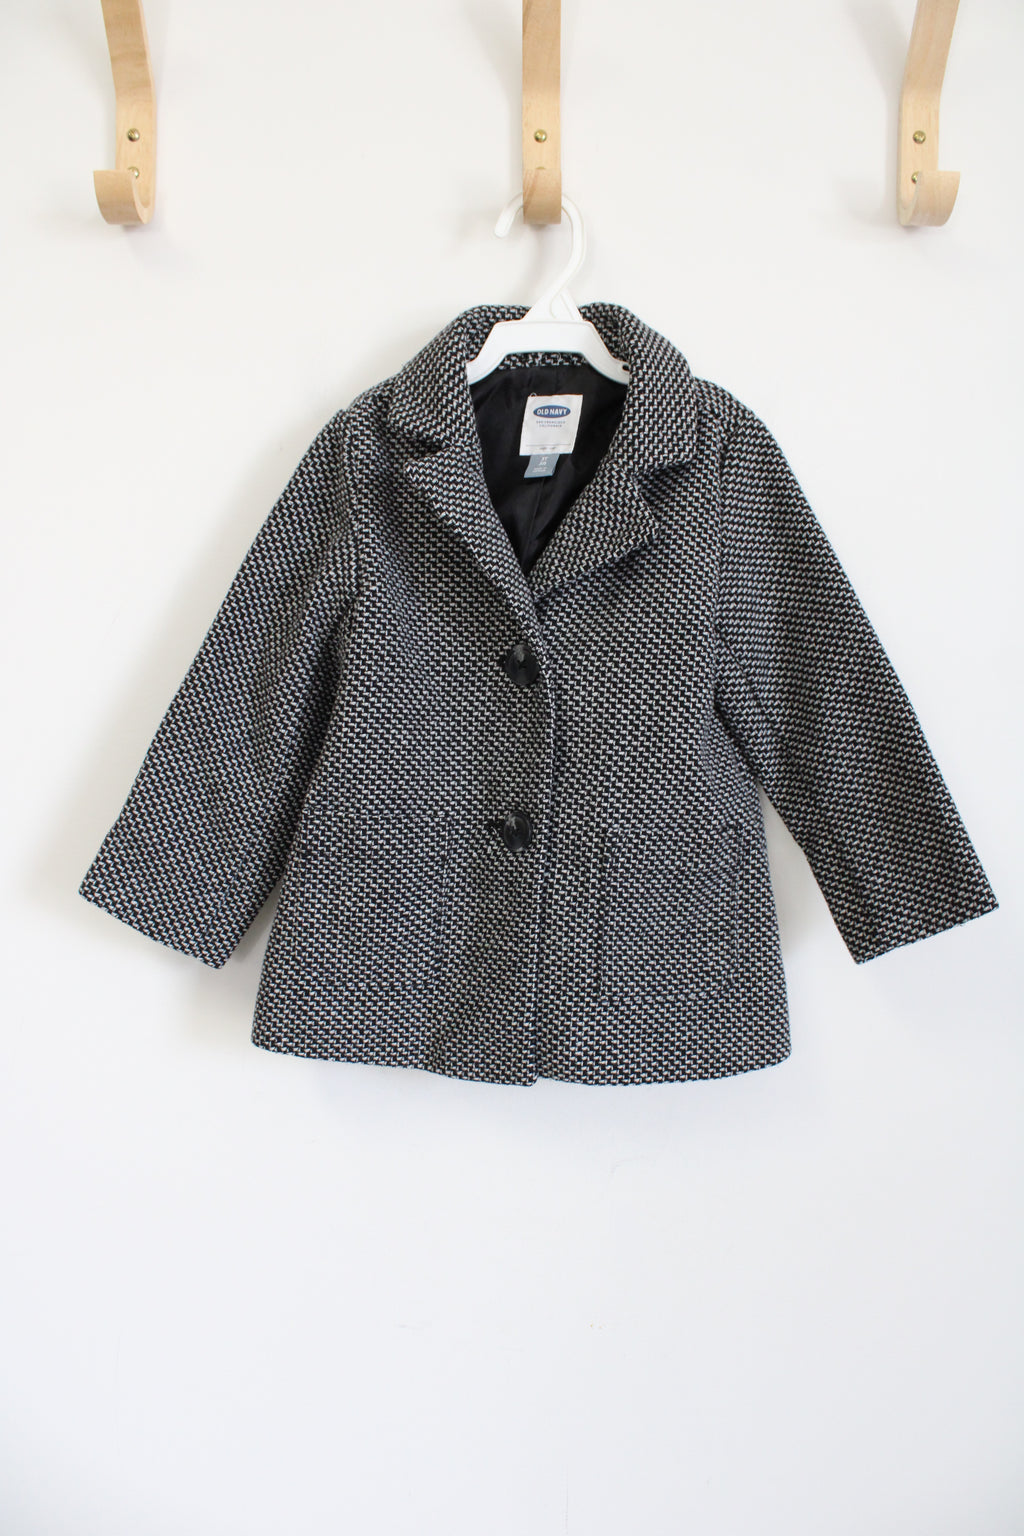 Old Navy Black Woven Jacket | 3T